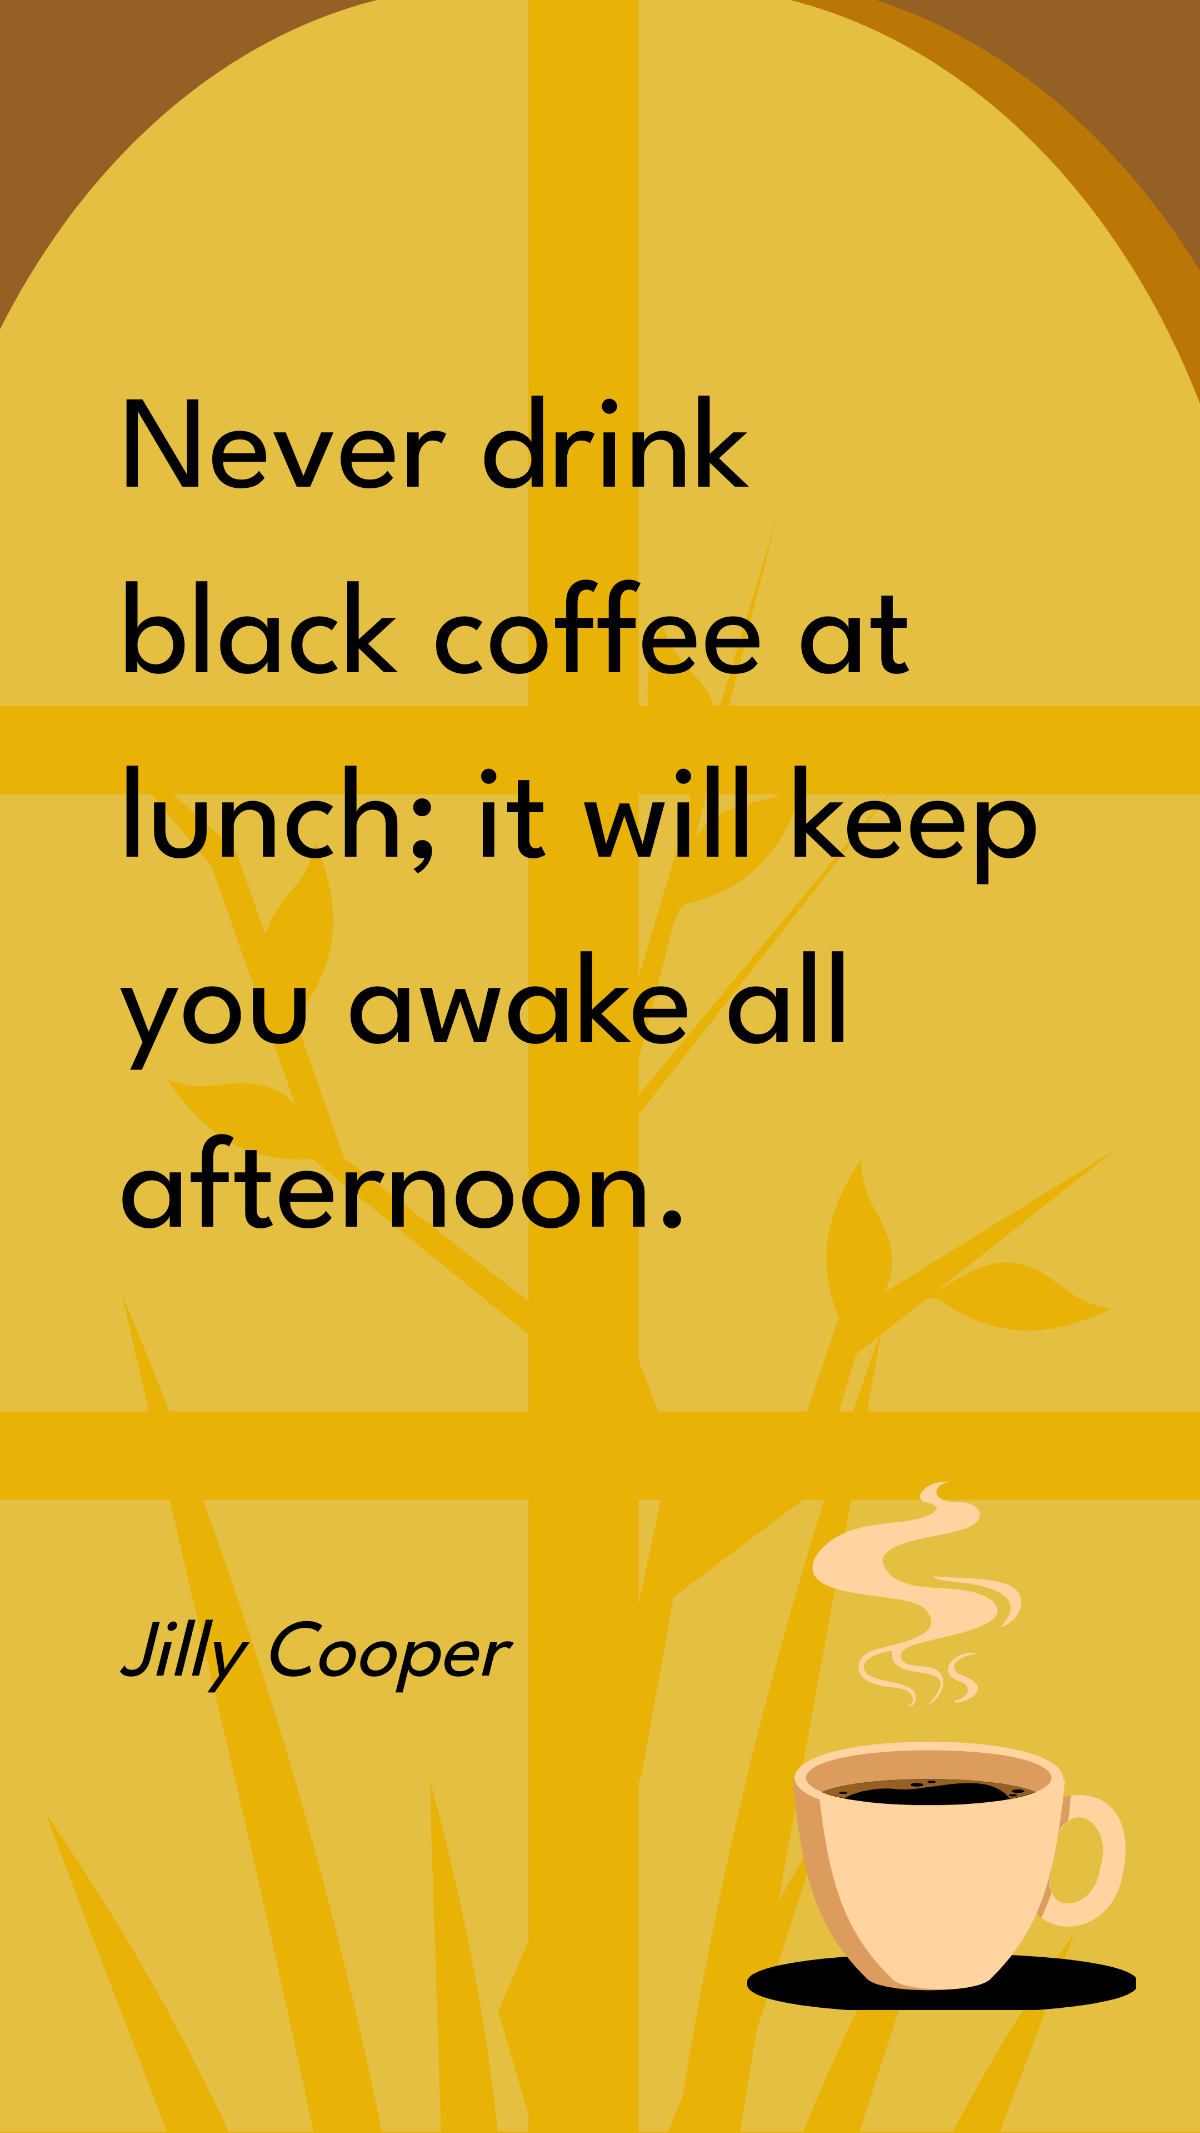 Jilly Cooper - Never drink black coffee at lunch; it will keep you awake all afternoon. Template